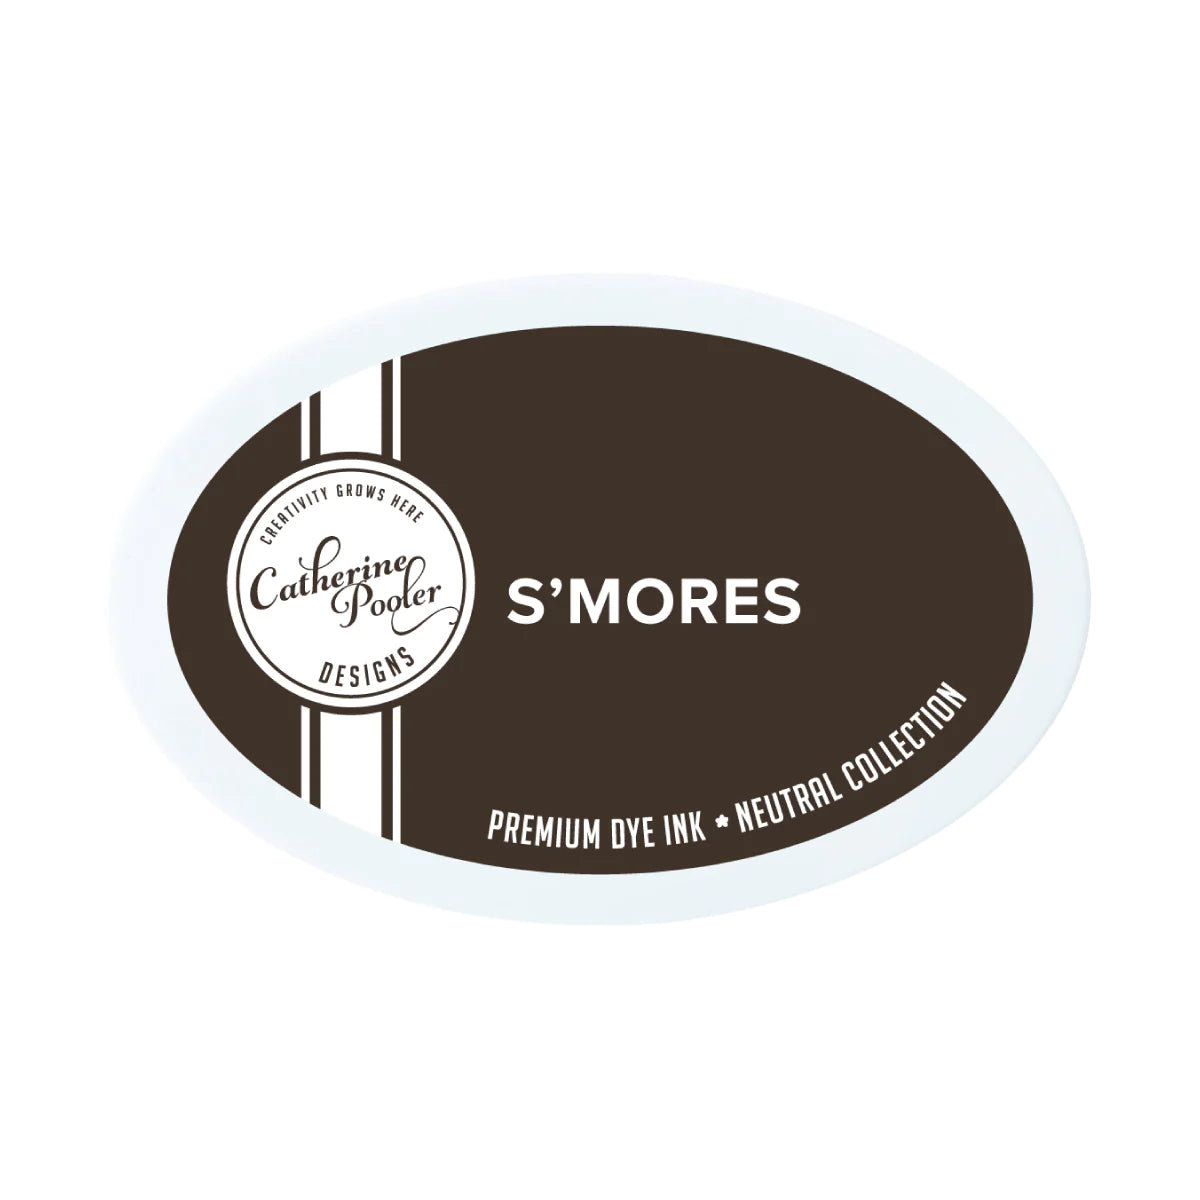 S'mores Premium Dye Ink Pad - Neutrals Collection